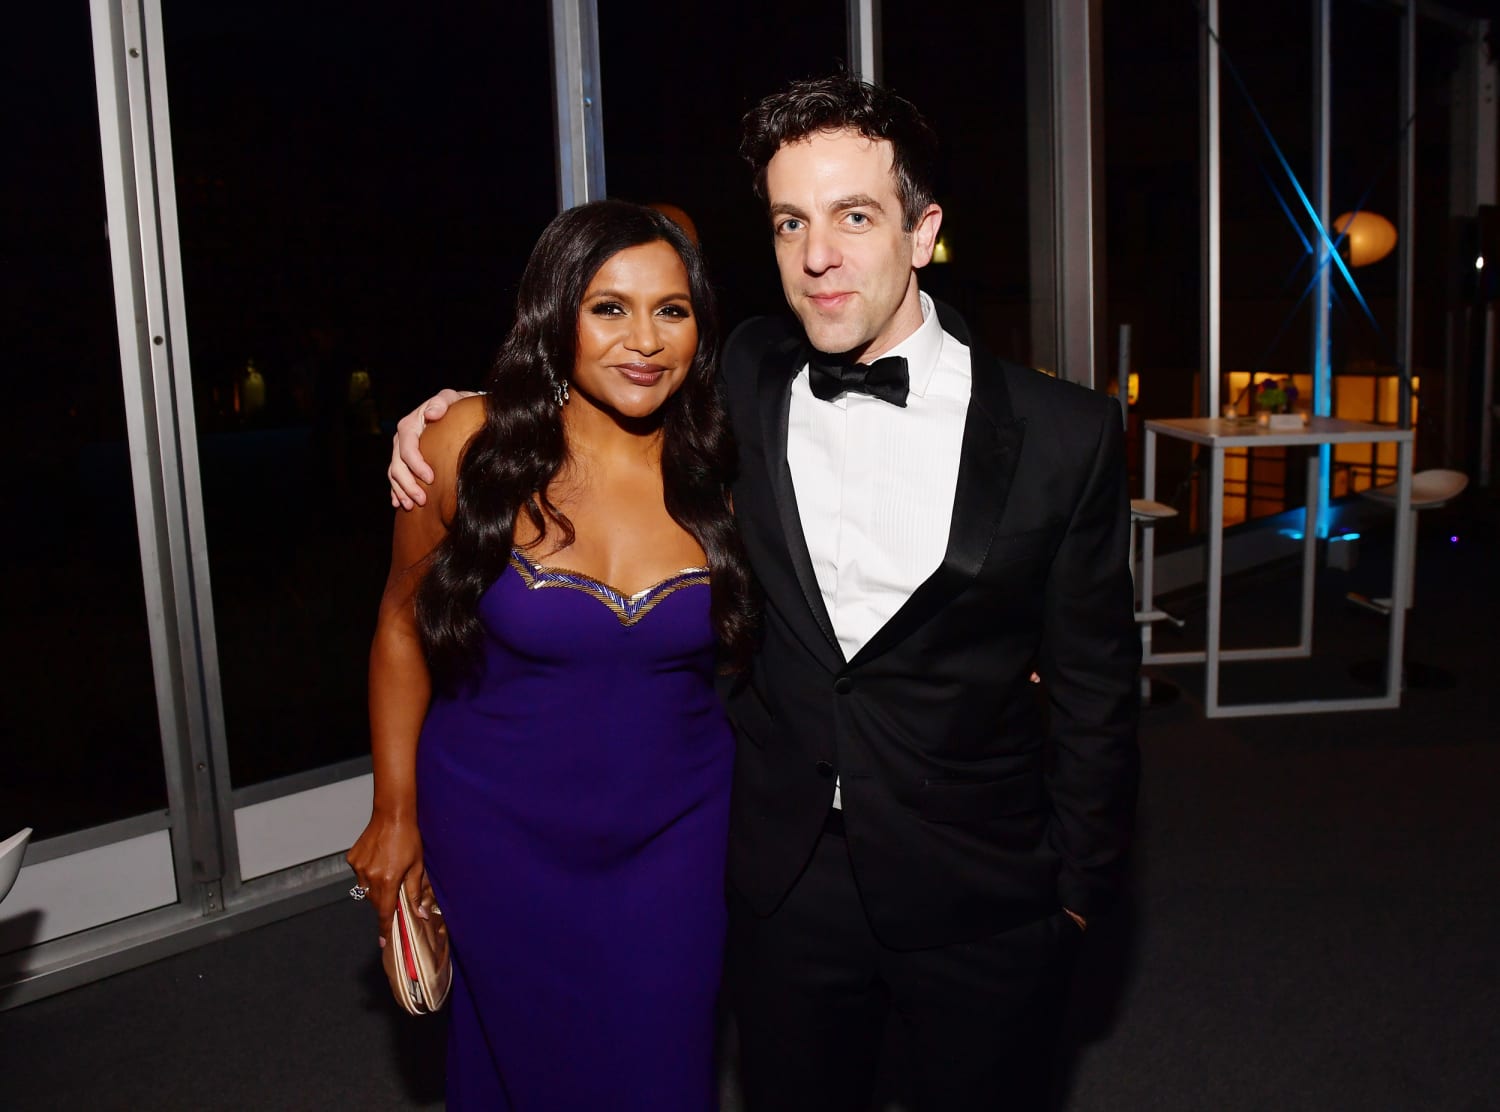 What Mindy Kaling thinks of the rumors that pic